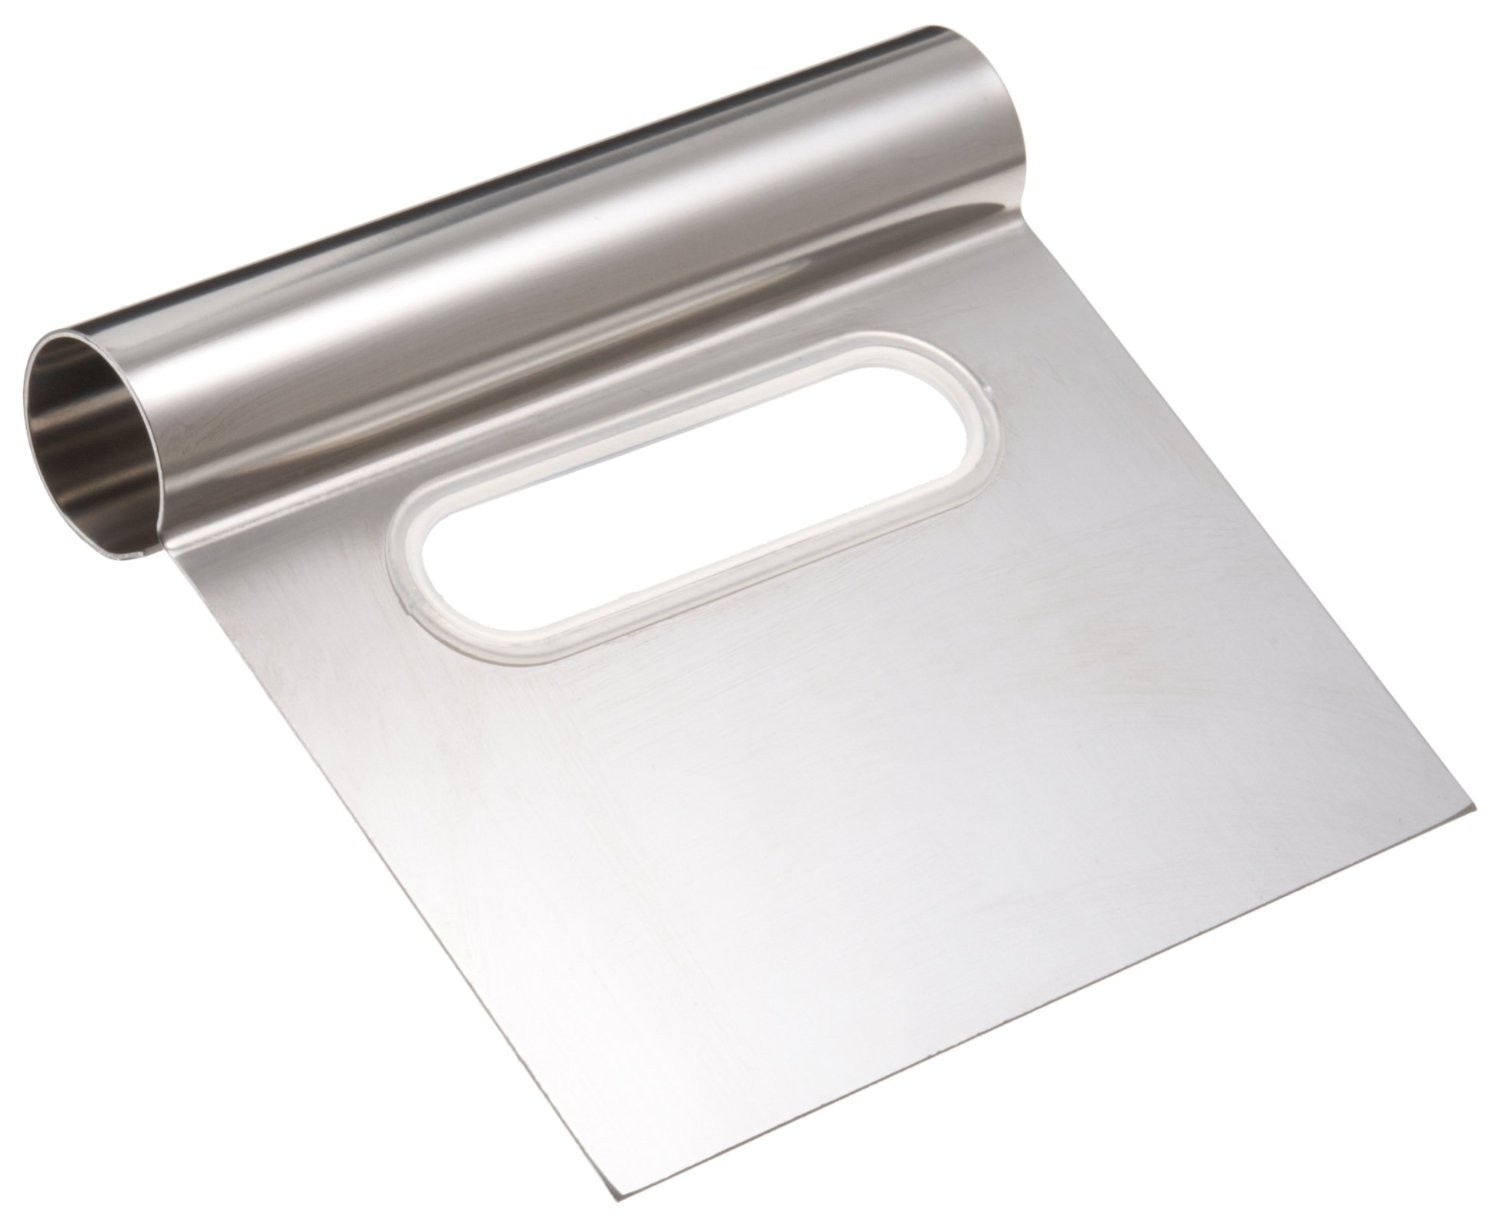 Ateco Stainless Steel Bench Scraper 4'' Wide Blade